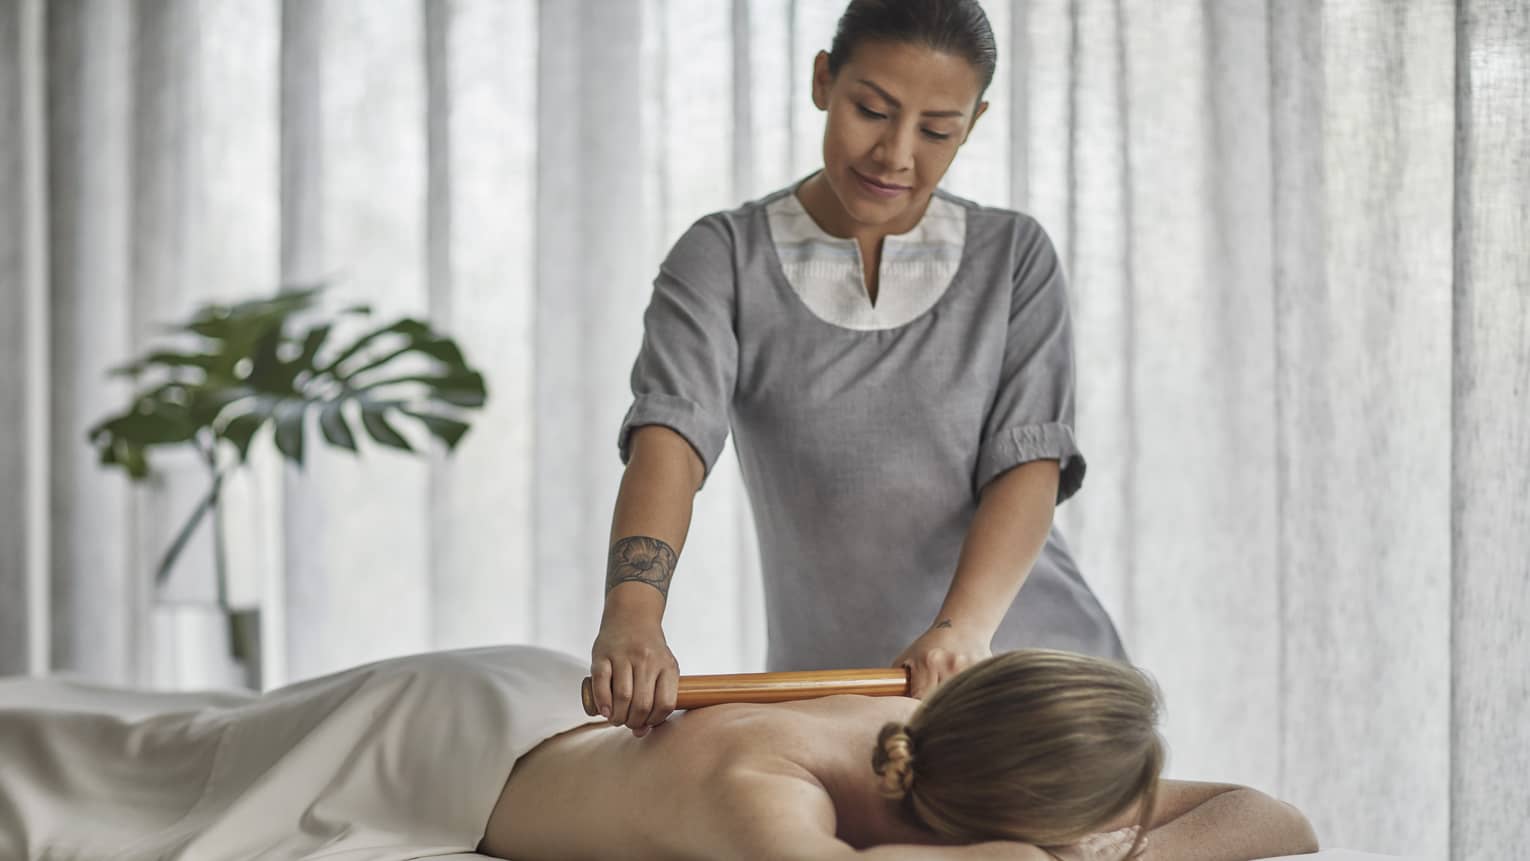 Spa therapist wearing a grey tunic rolls a wooden roller on the bare back of a guest who is laying on a massage table 